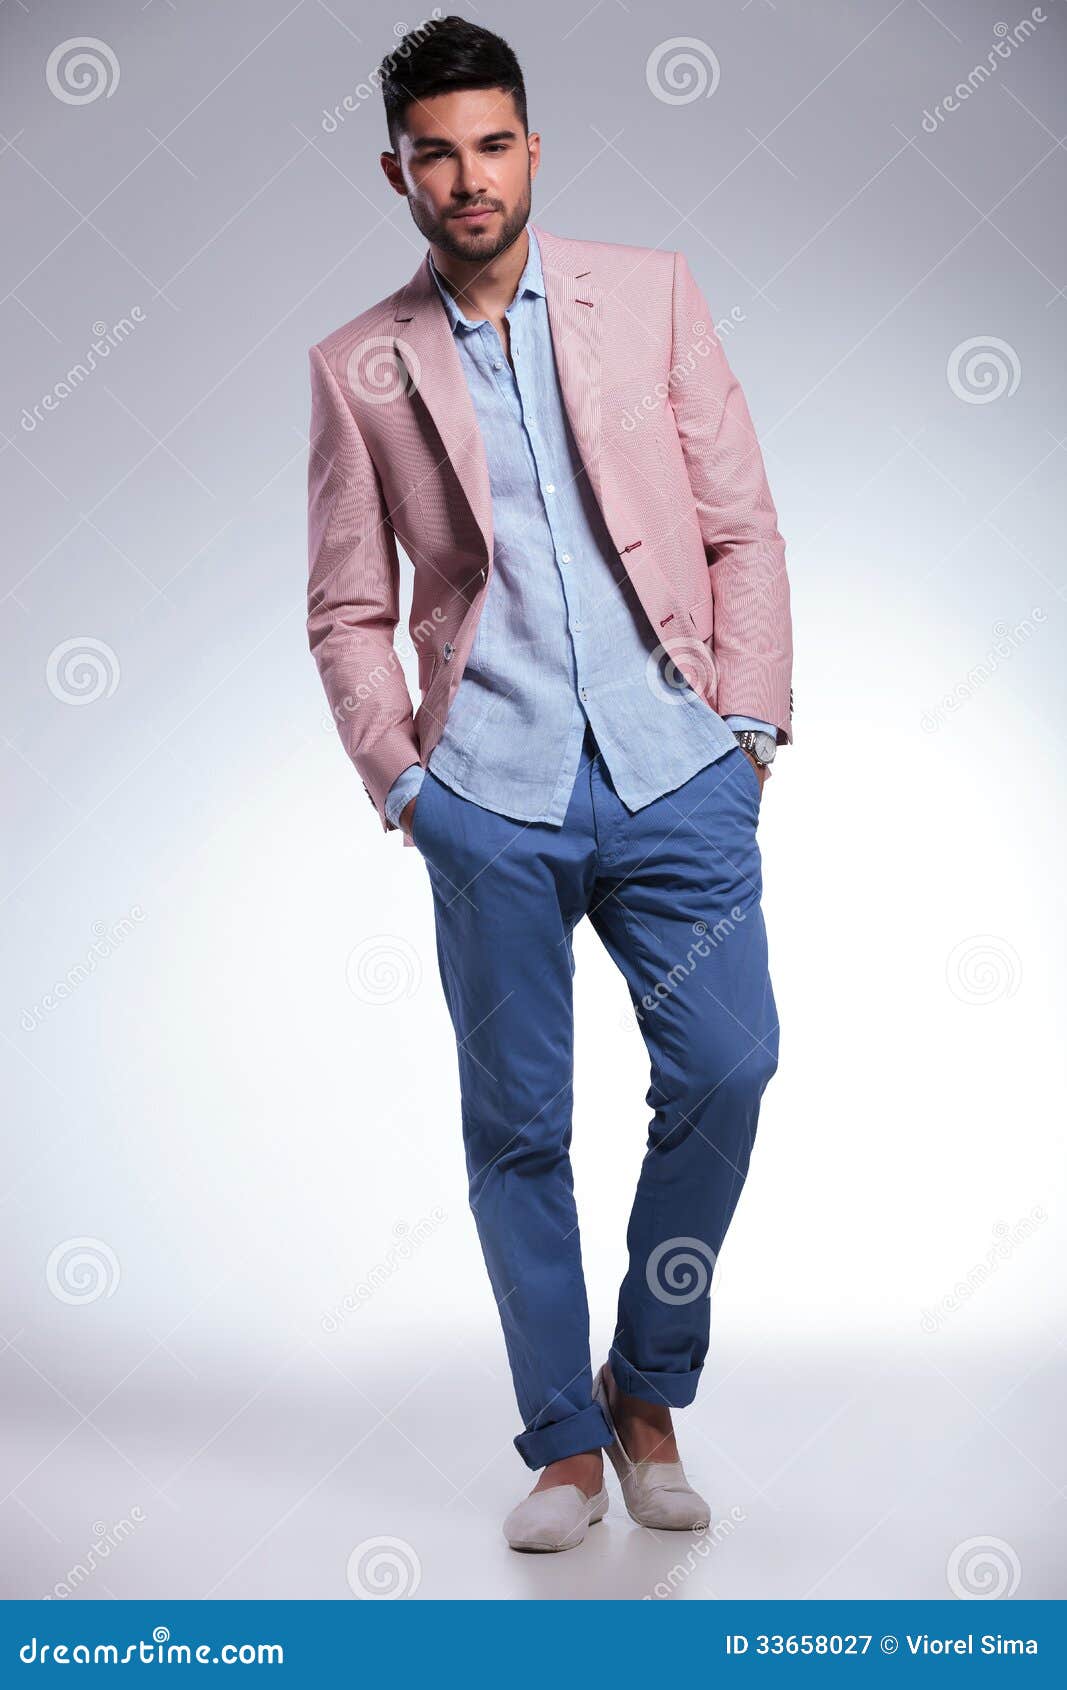 Casual Man With Both Hands In Pockets Royalty Free Stock Photography ...